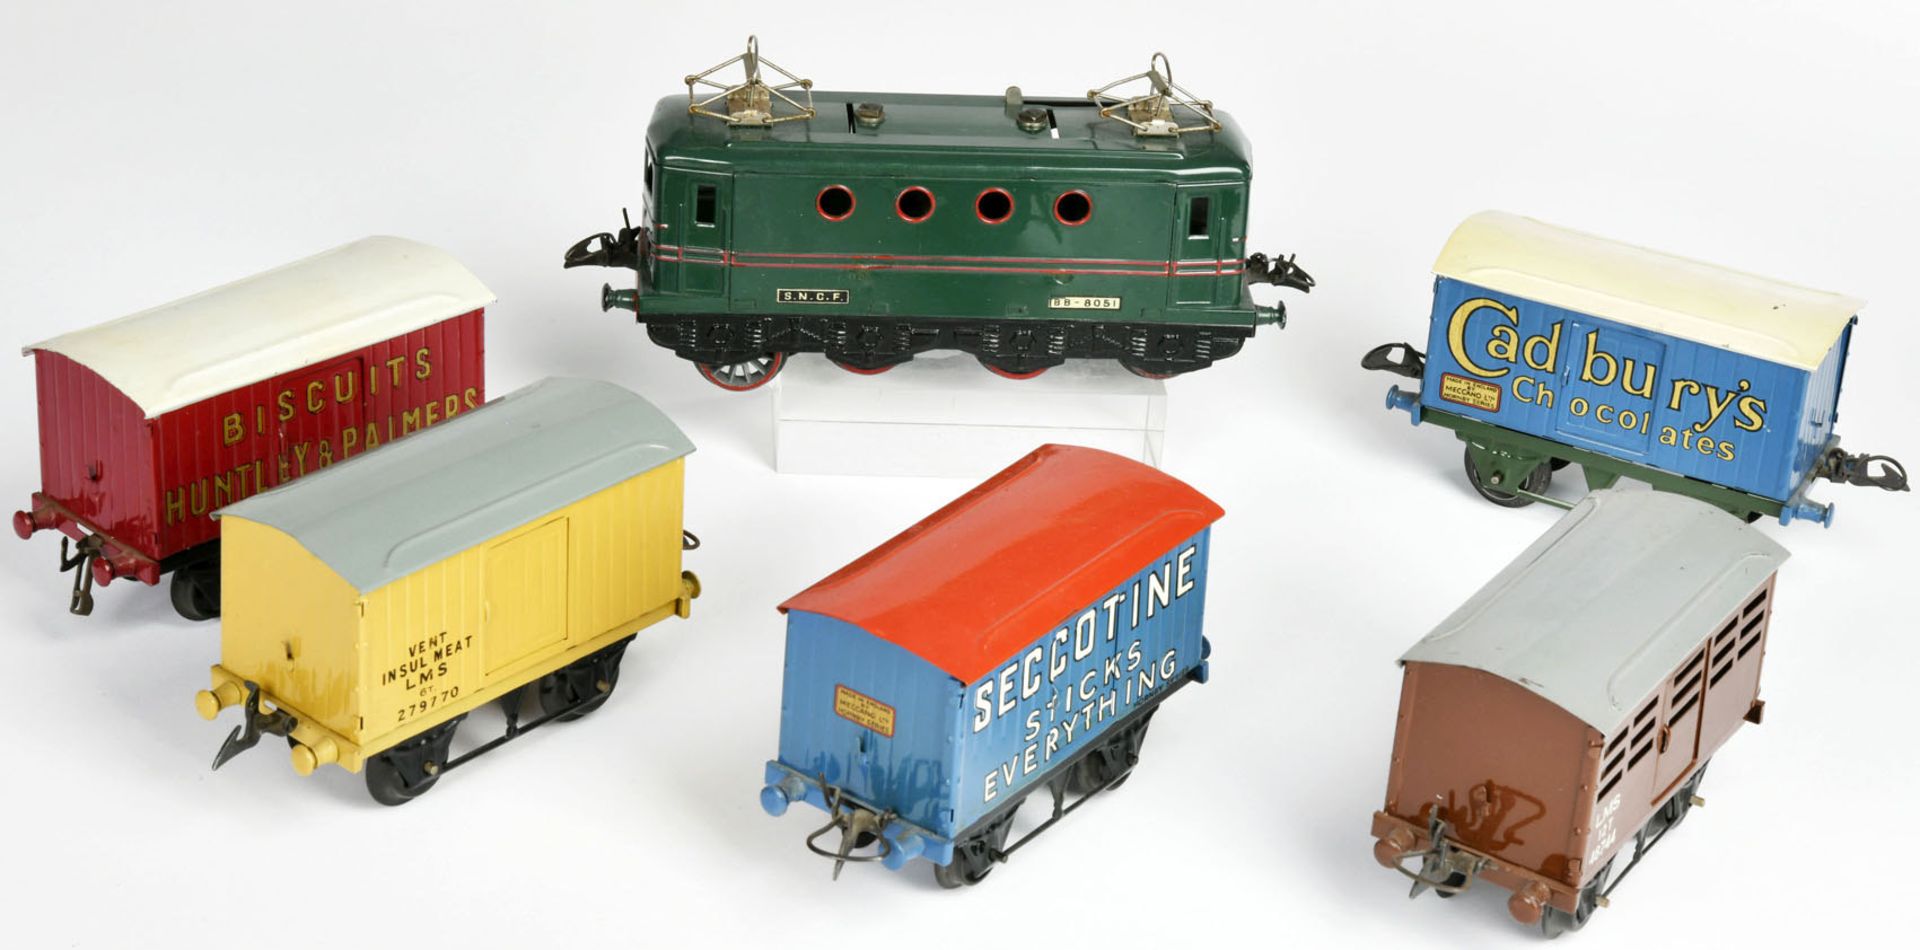 Hornby, E-locomotive SNCF 8051 + 5 wagons, England, Spur 0, tin, min. paint d., C 1-2 - Image 2 of 3